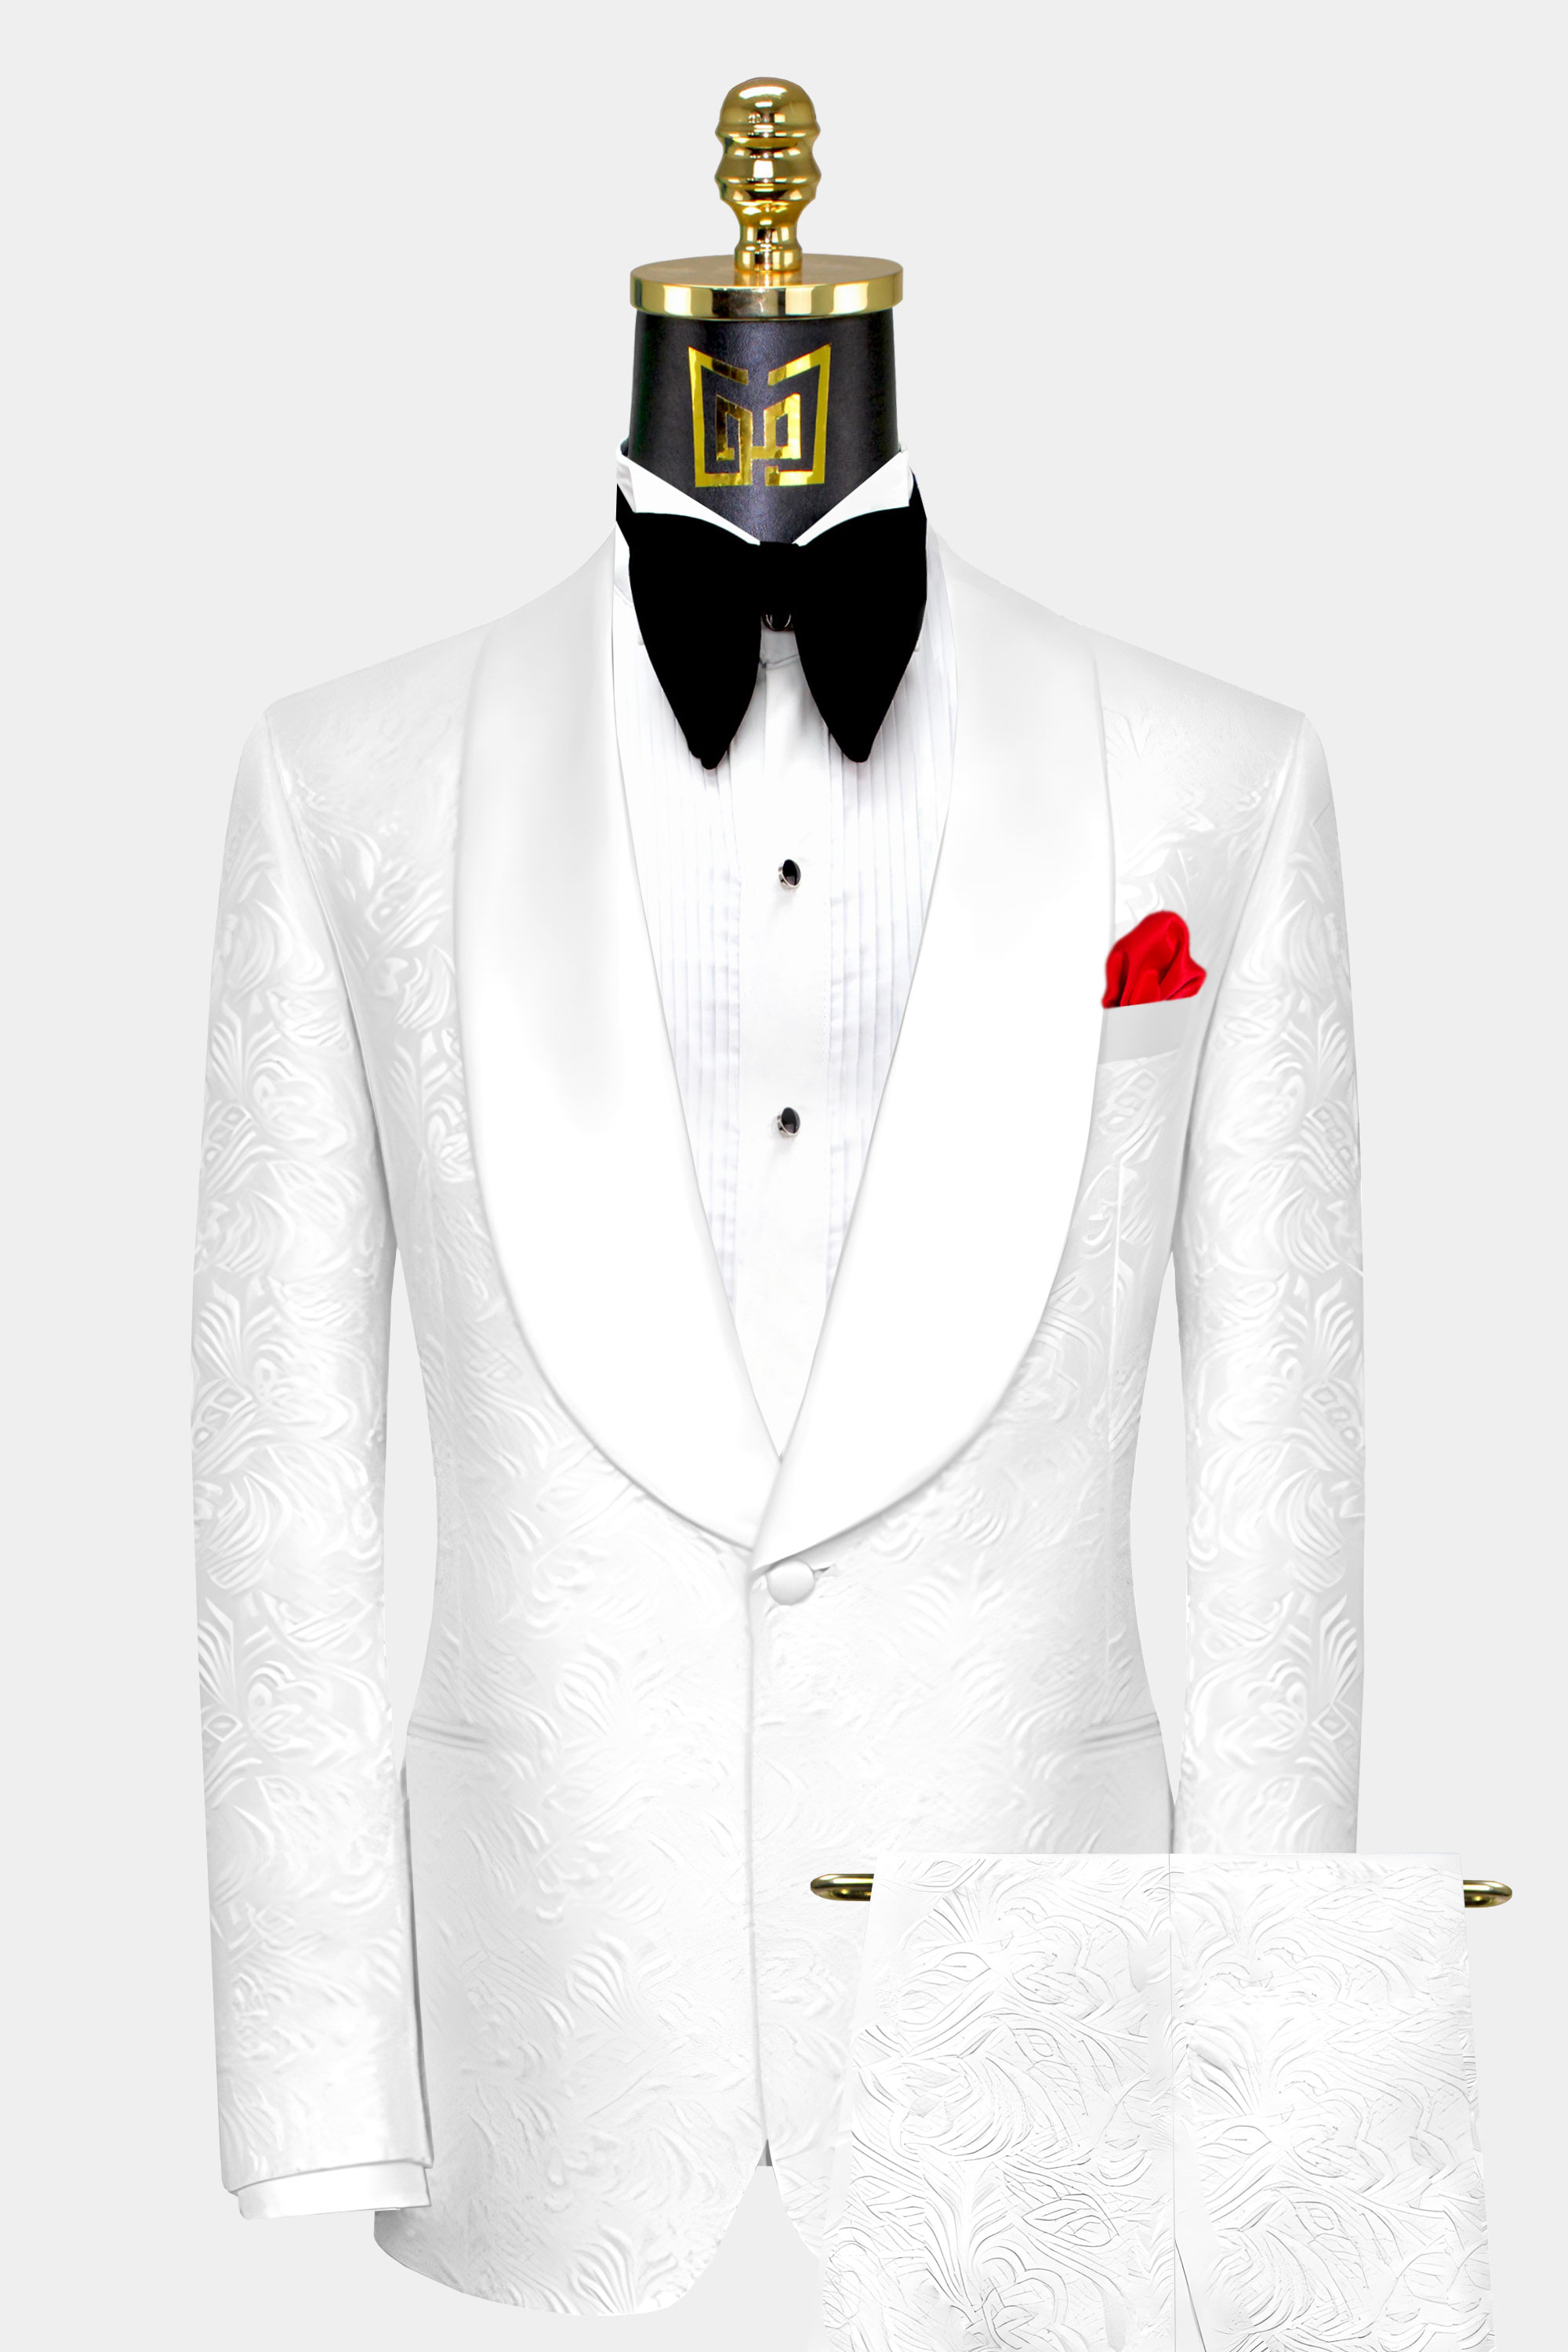 White Mens Wedding Suits Groom Tuxedos Vintage Two Pieces Slim Fit